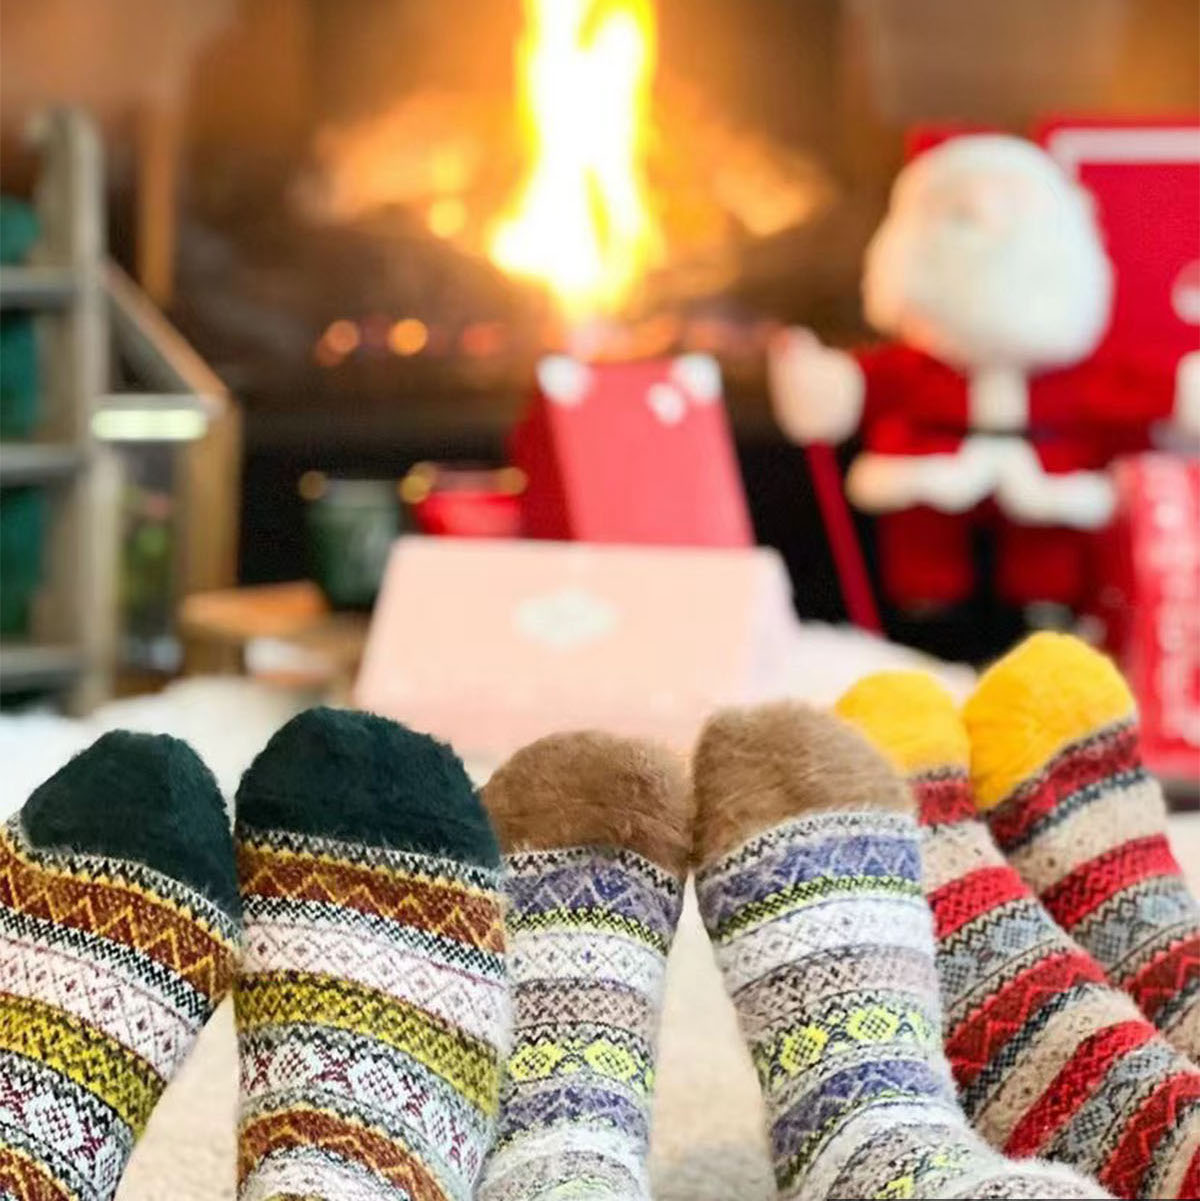 19 Of The Best Cozy Gifts To Warm Up Your Holiday Season